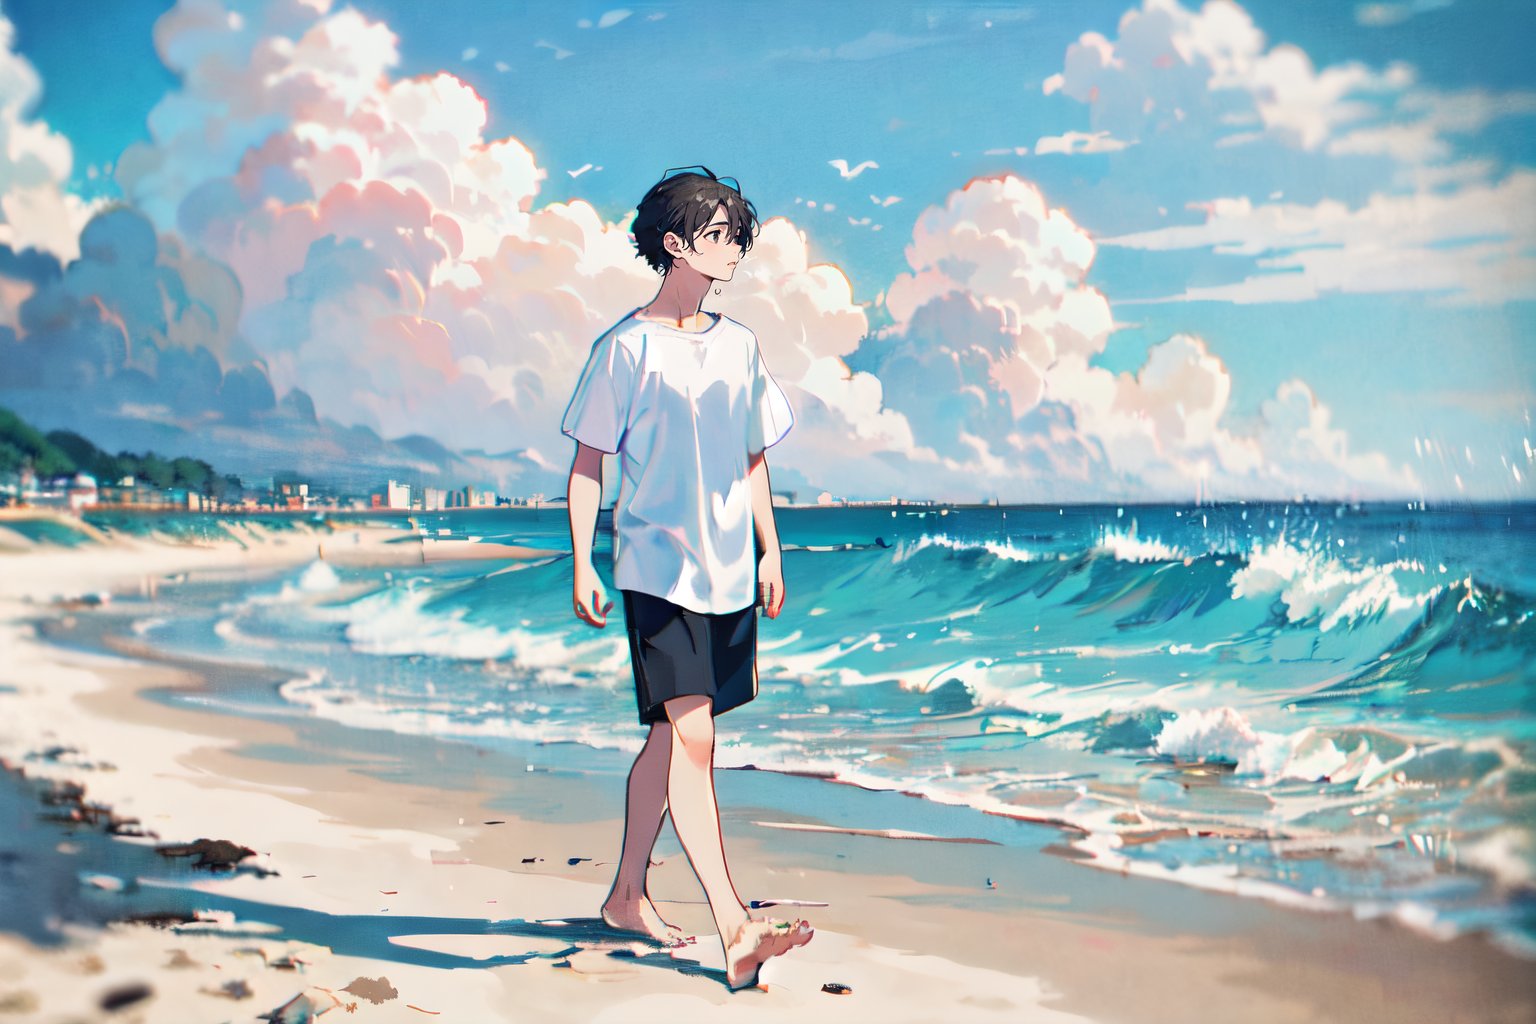 A beautiful boy with dark hair is walking along the beach. He wears a white shirt that flutters in the wind and walks barefoot on the beach where the waves are crashing.